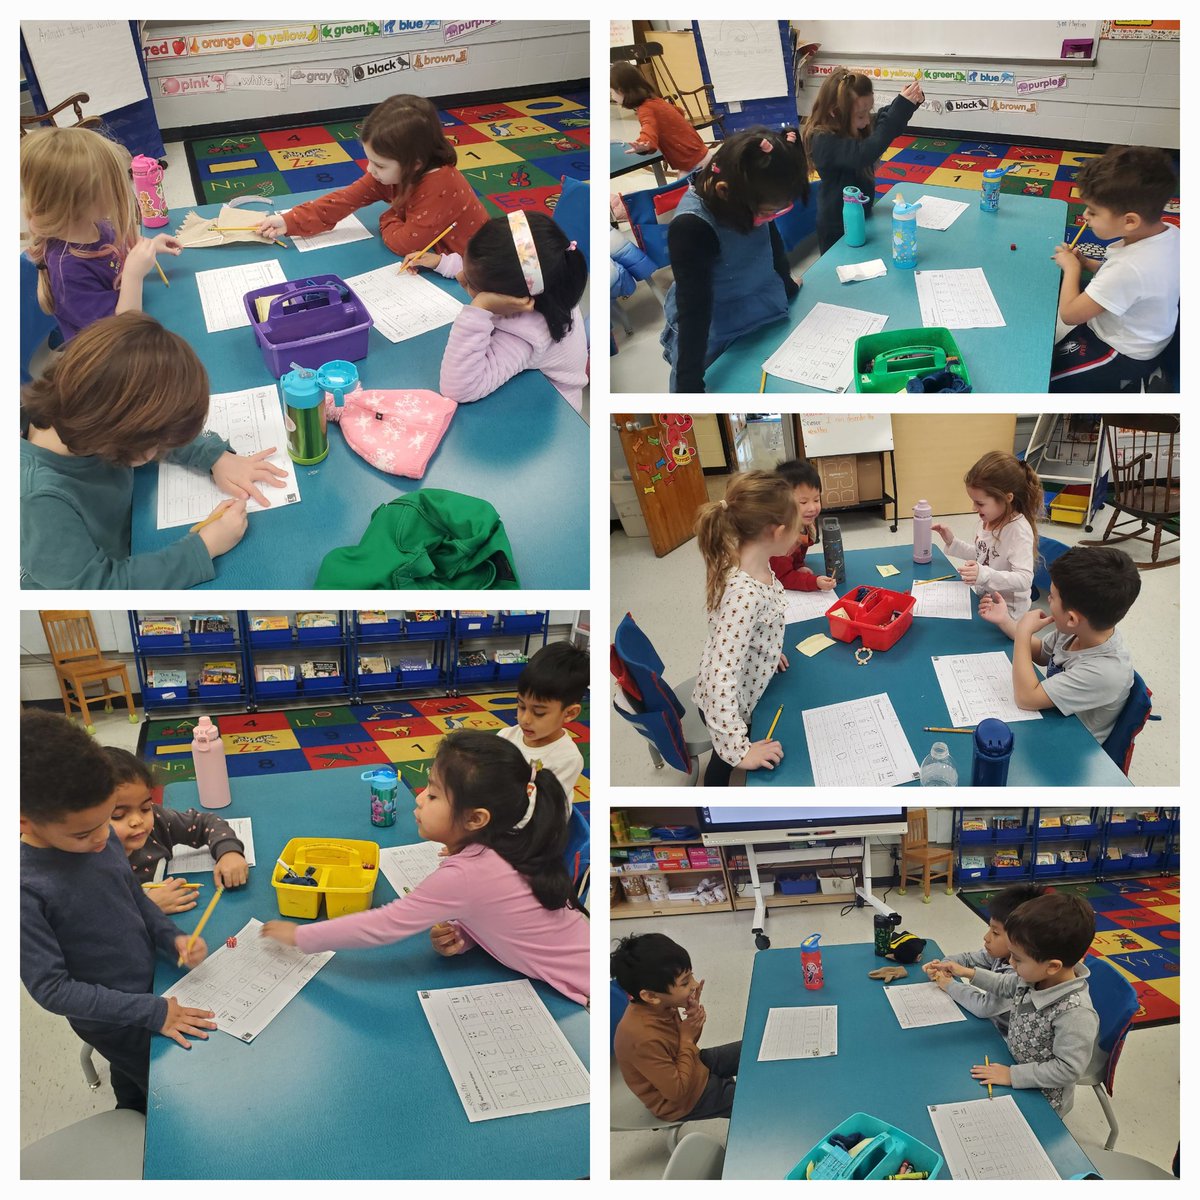 Today we played roll and record to practice writing capital letters. It was wildly (and loudly) fun! @JJESOwls